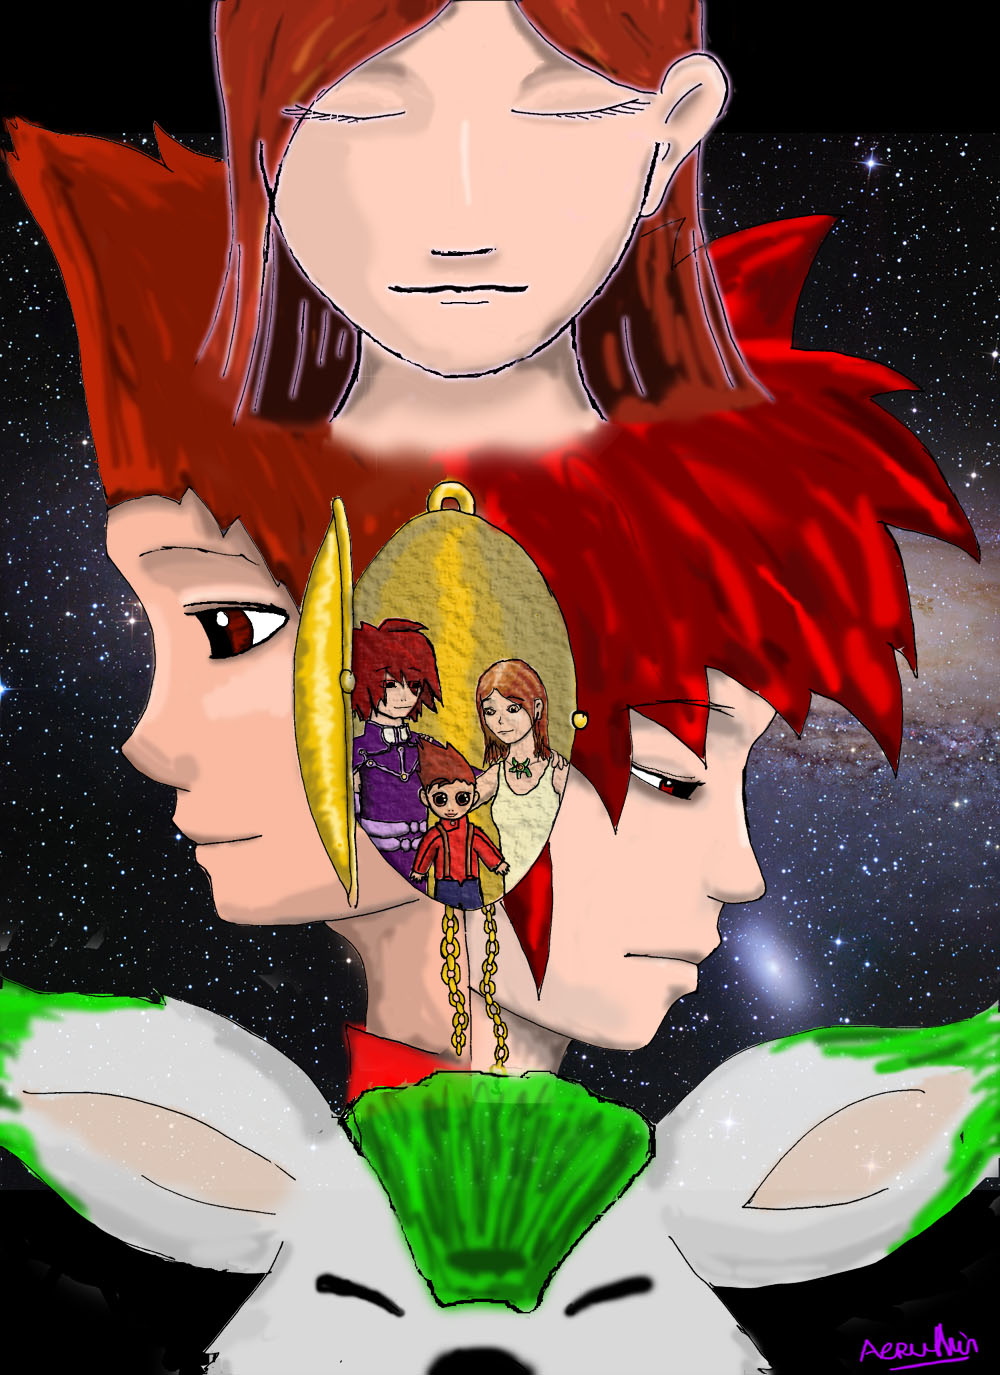 Family Aurion/irving by Aeruthin